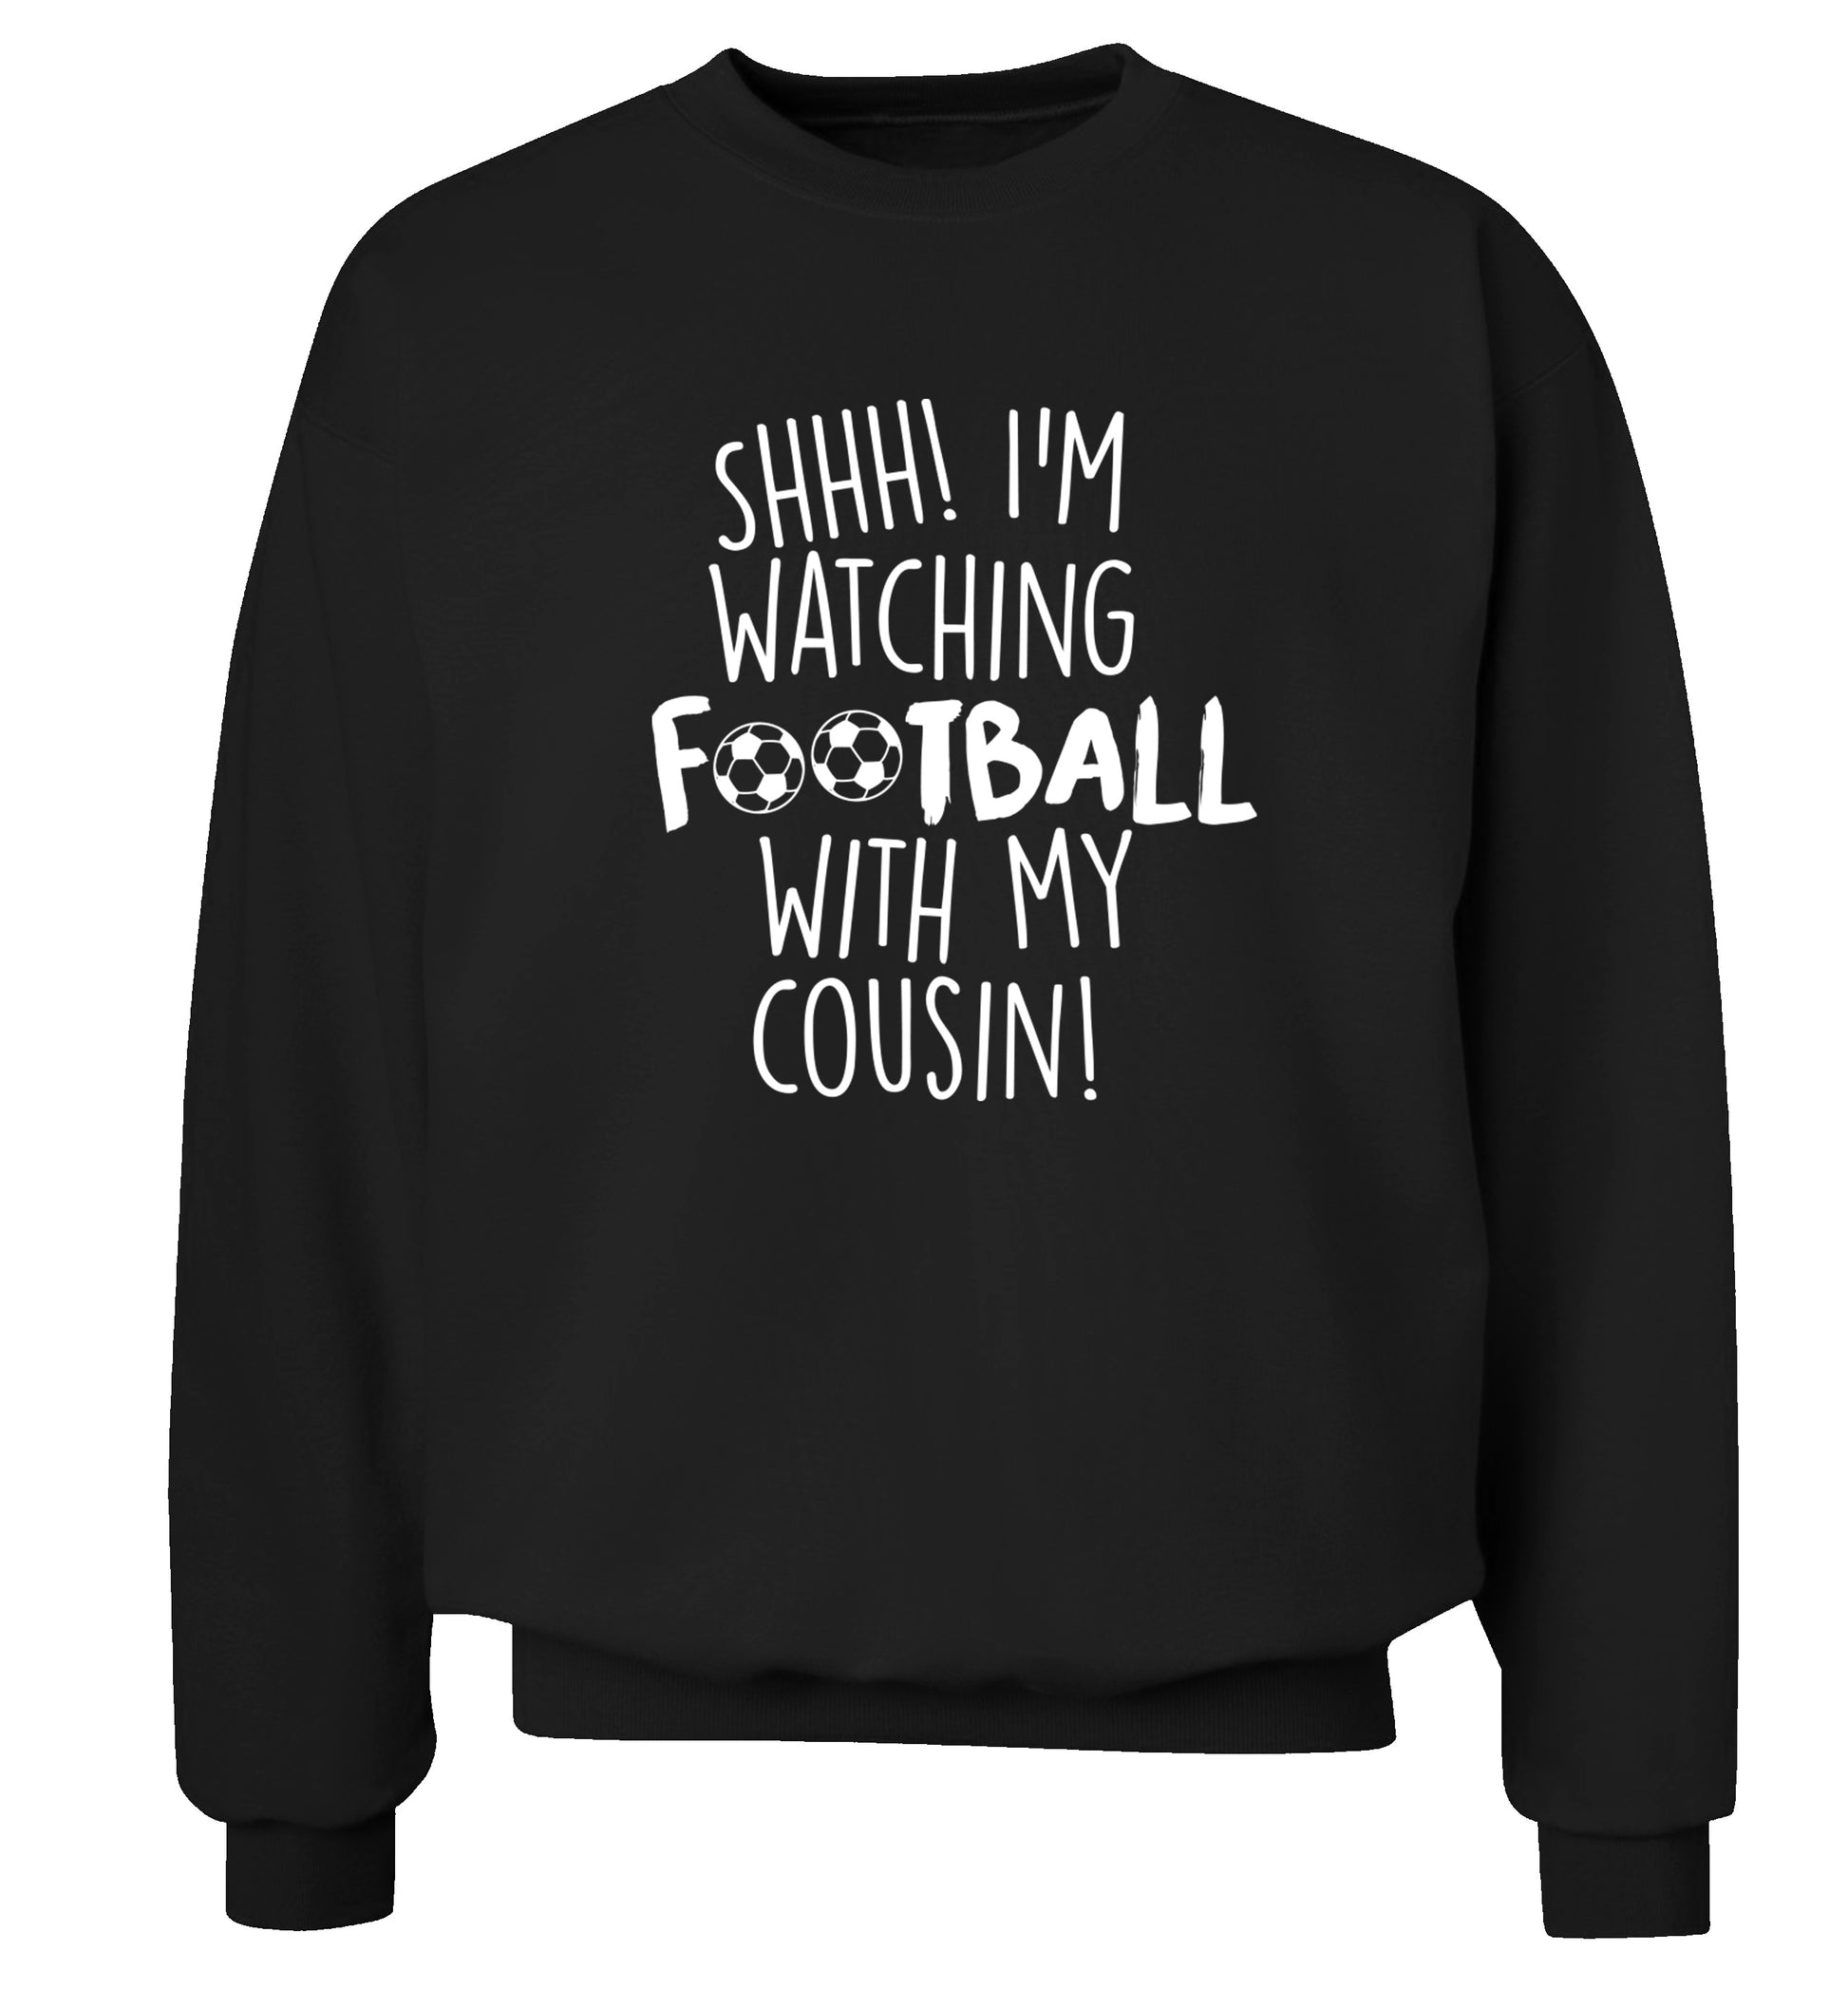 Shhh I'm watching football with my cousin Adult's unisexblack Sweater 2XL